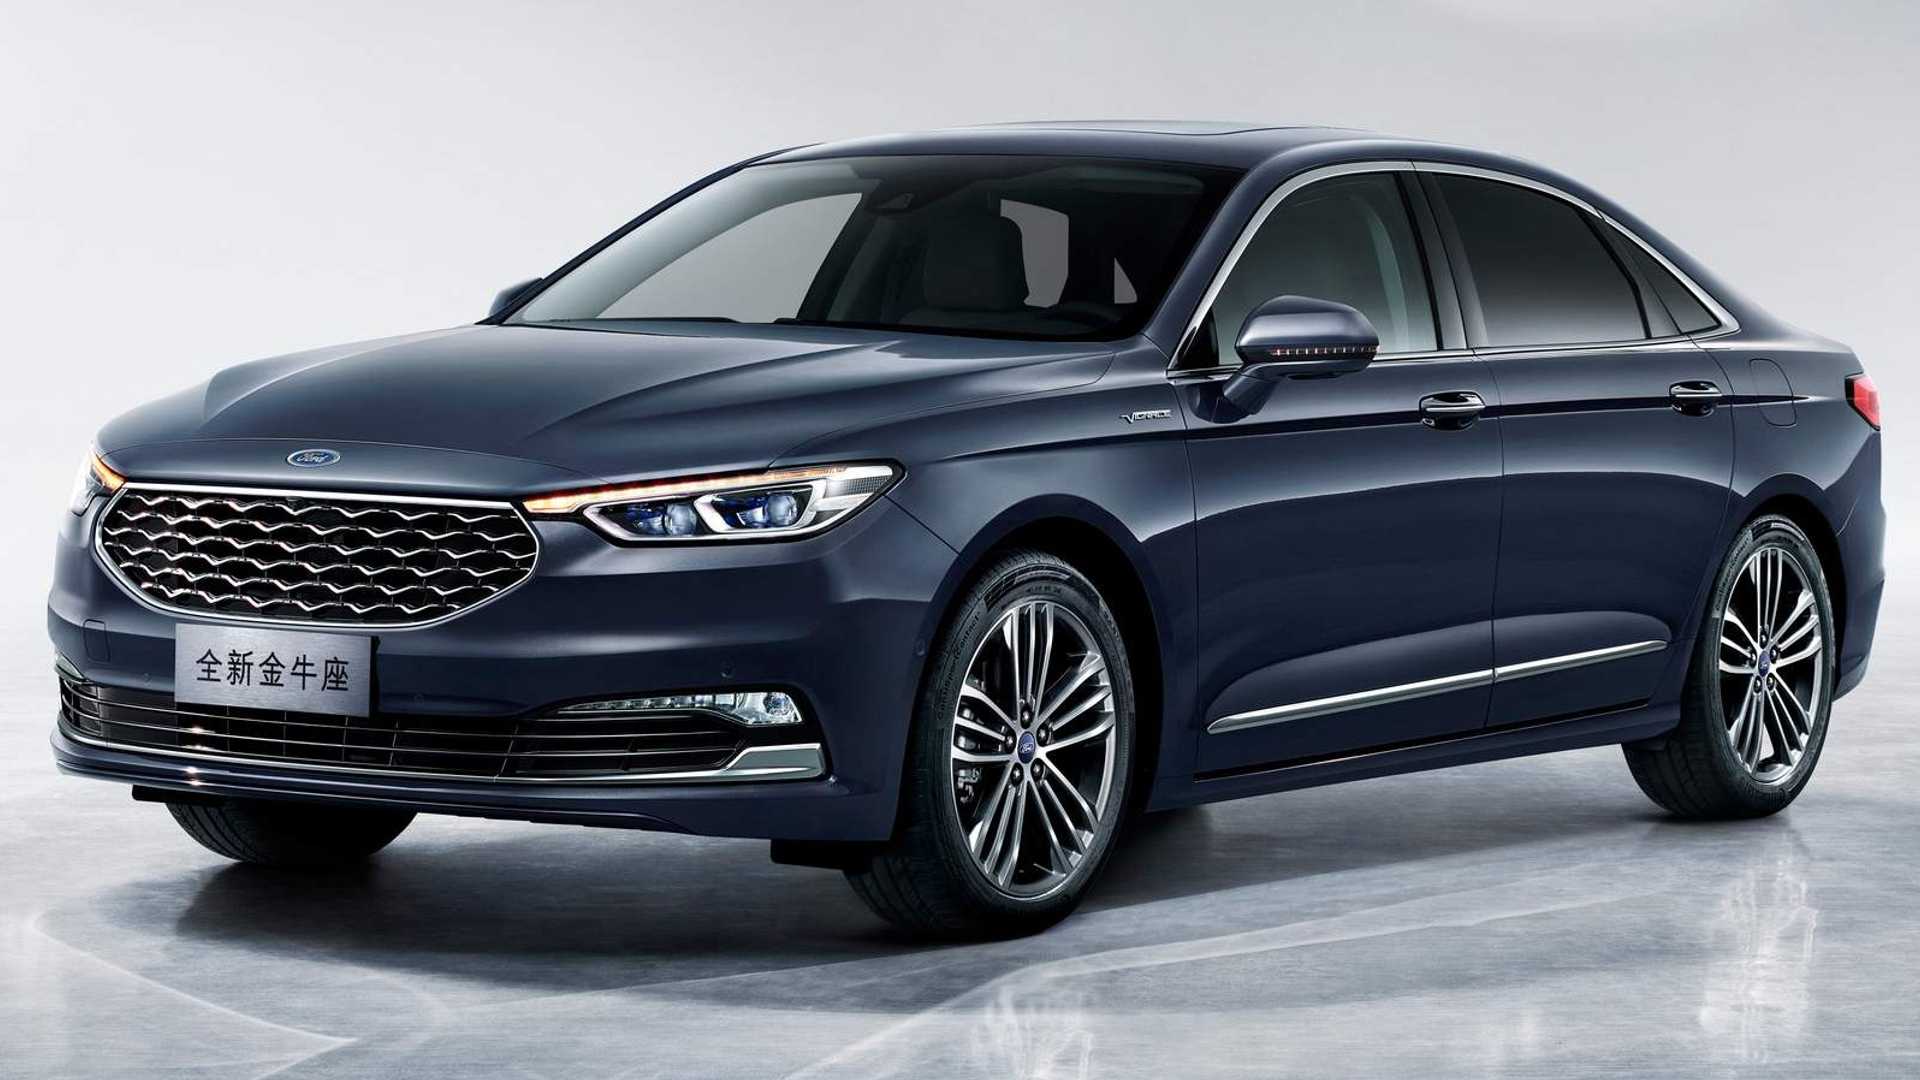 2021 Ford Taurus Redesign